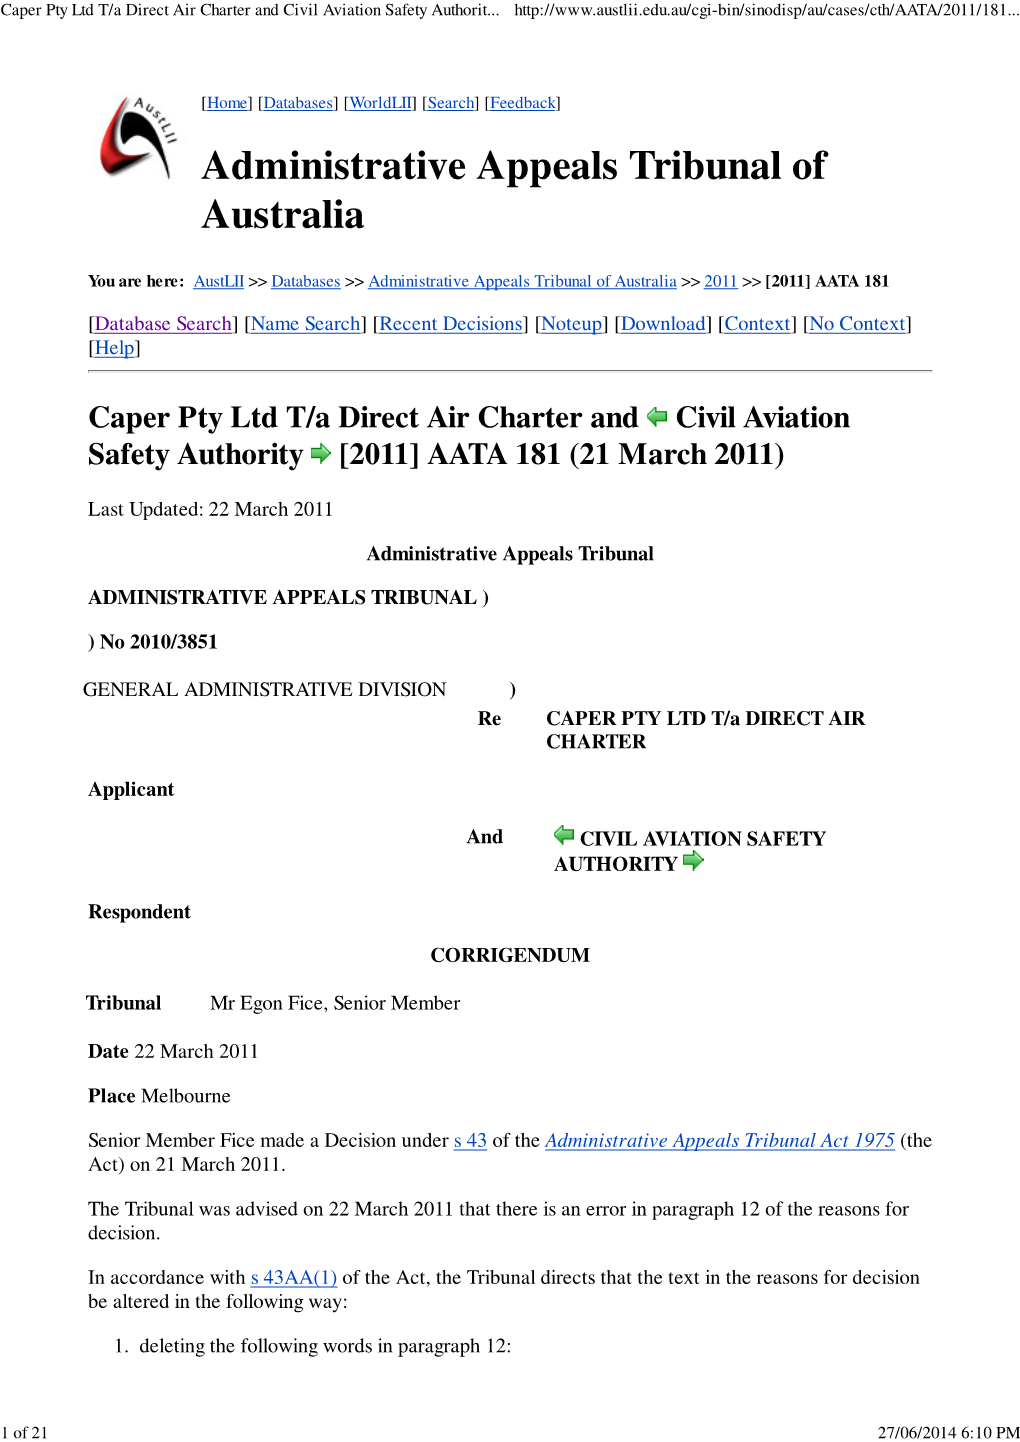 Caper Pty Ltd T/A Direct Air Charter and Civil Aviation Safety Authority [2011] AATA 181 (21 March 2011)